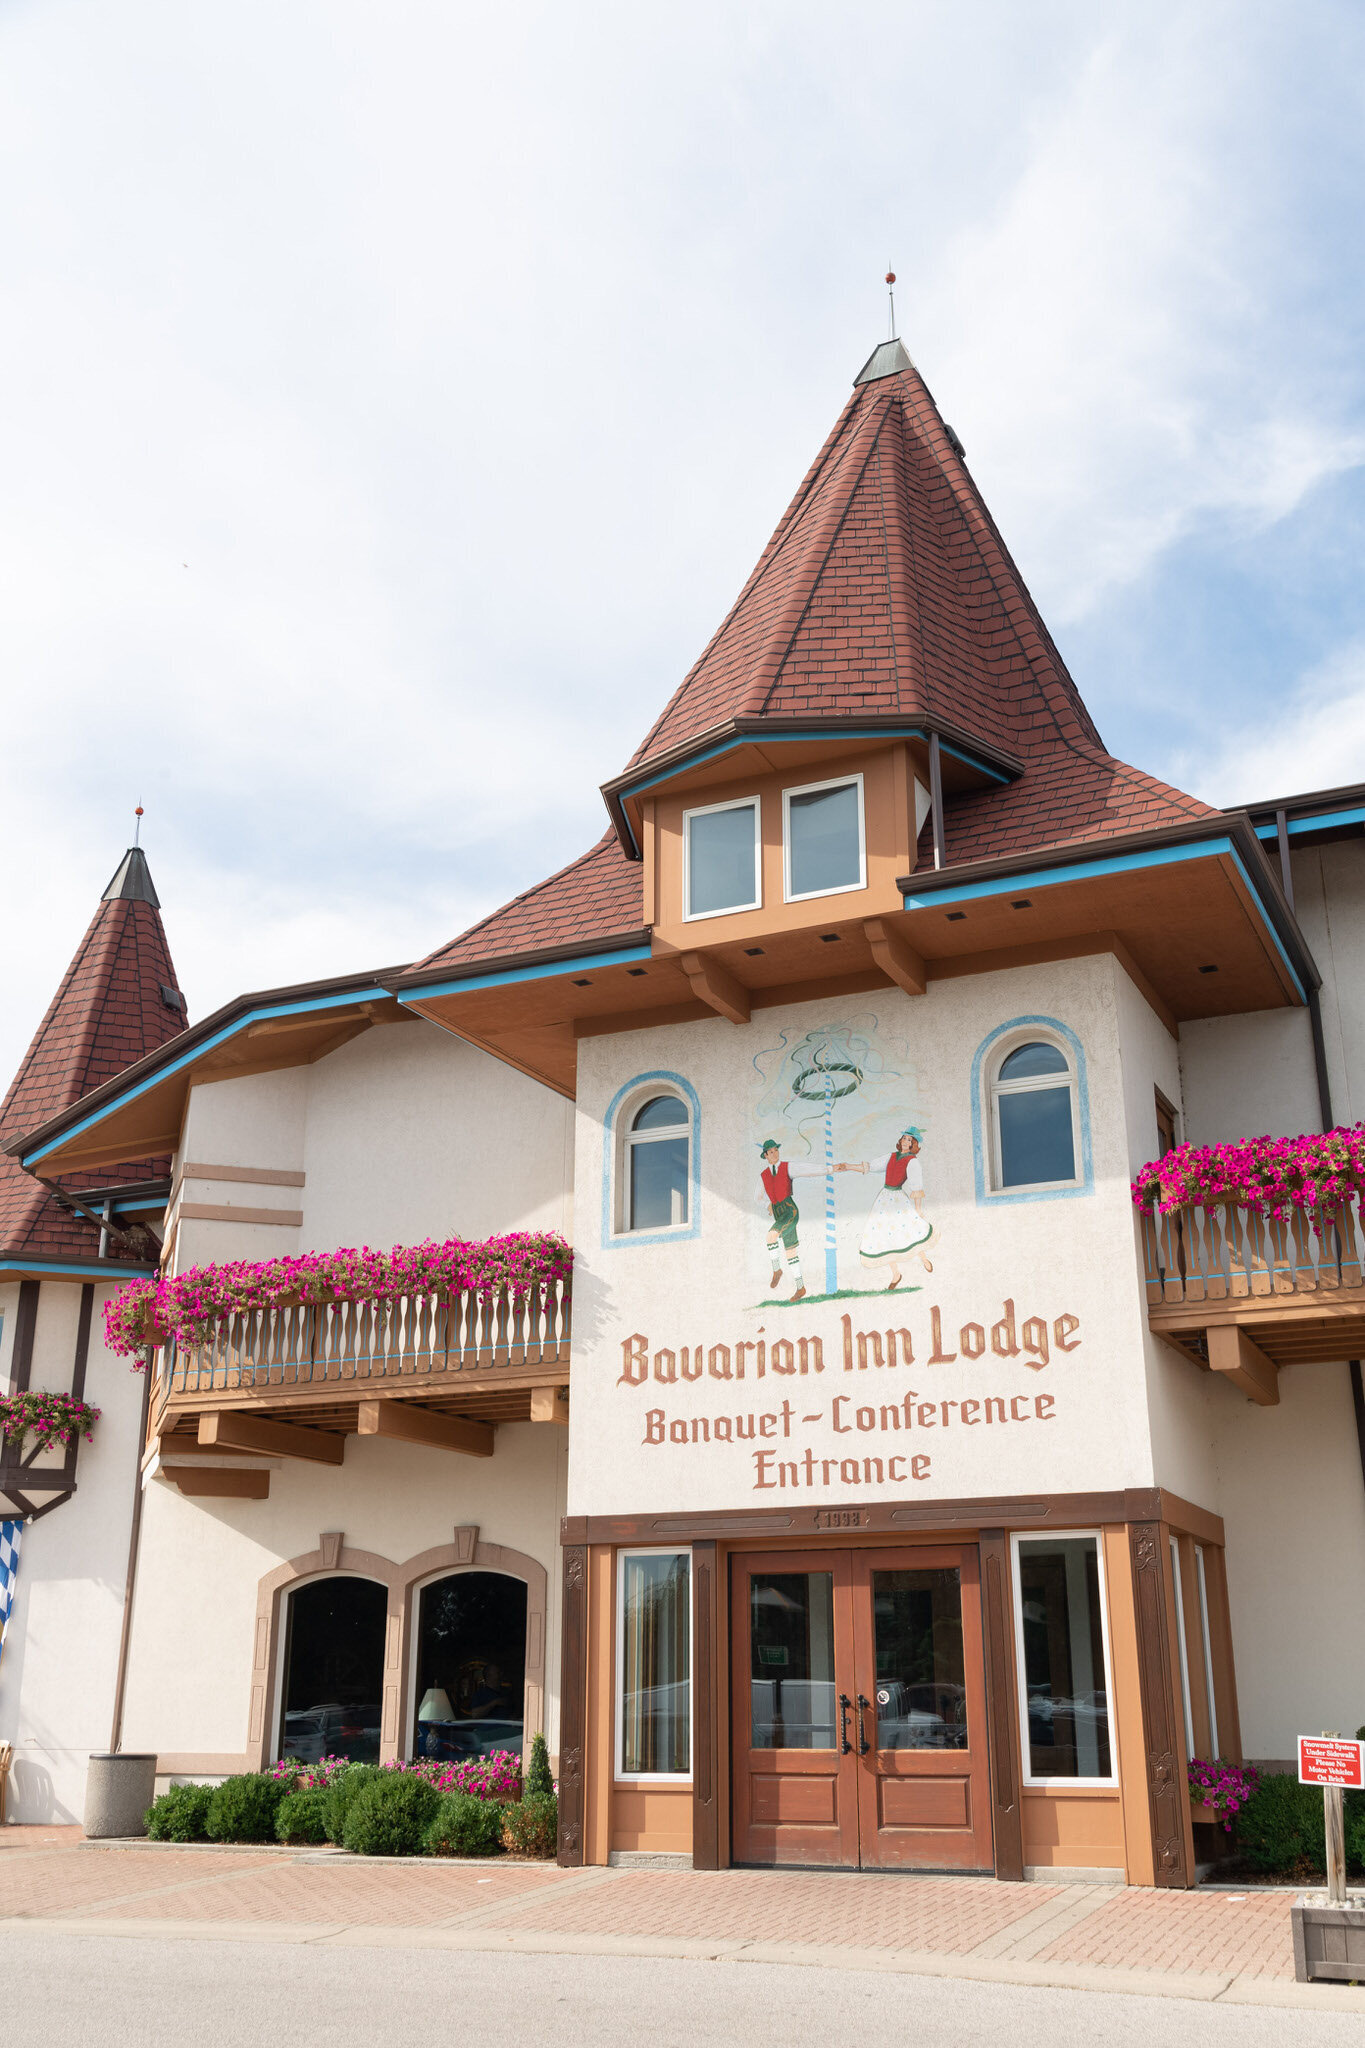 the entrance to the Bavarian Inn Lodge in Frankenmuth, MI